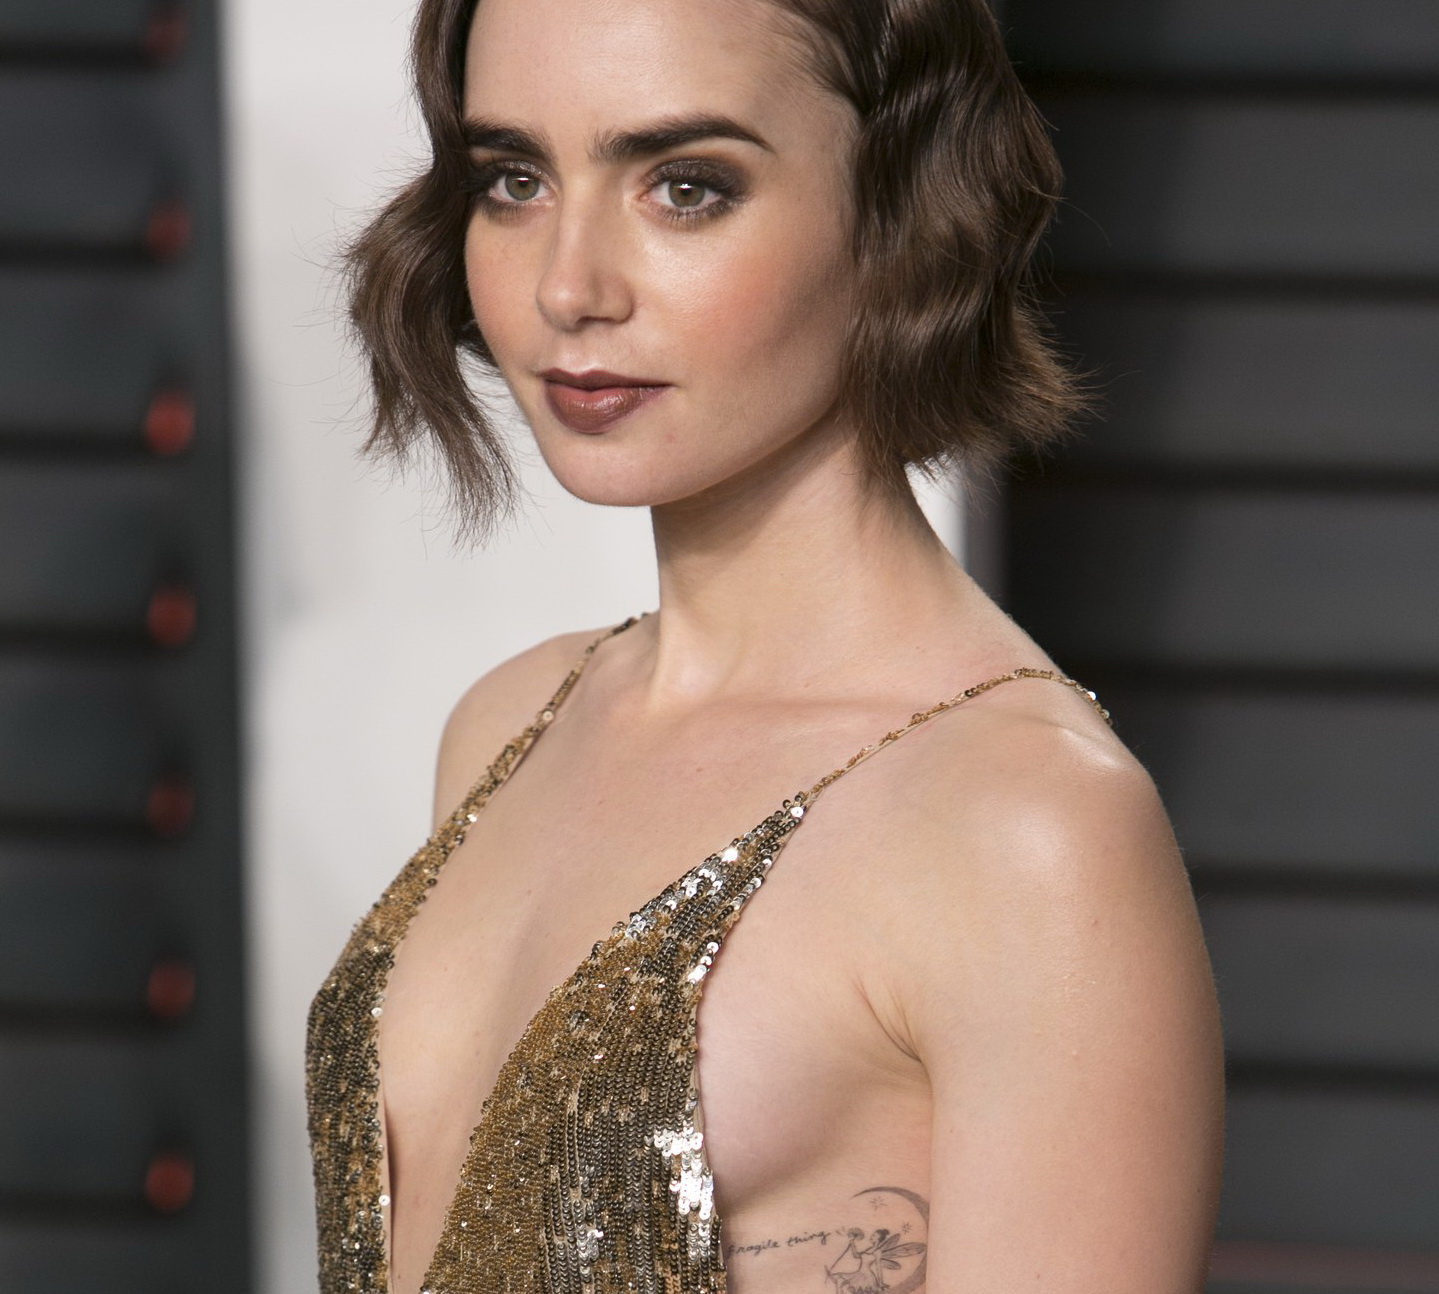 chen peter share lily collins nipples photos